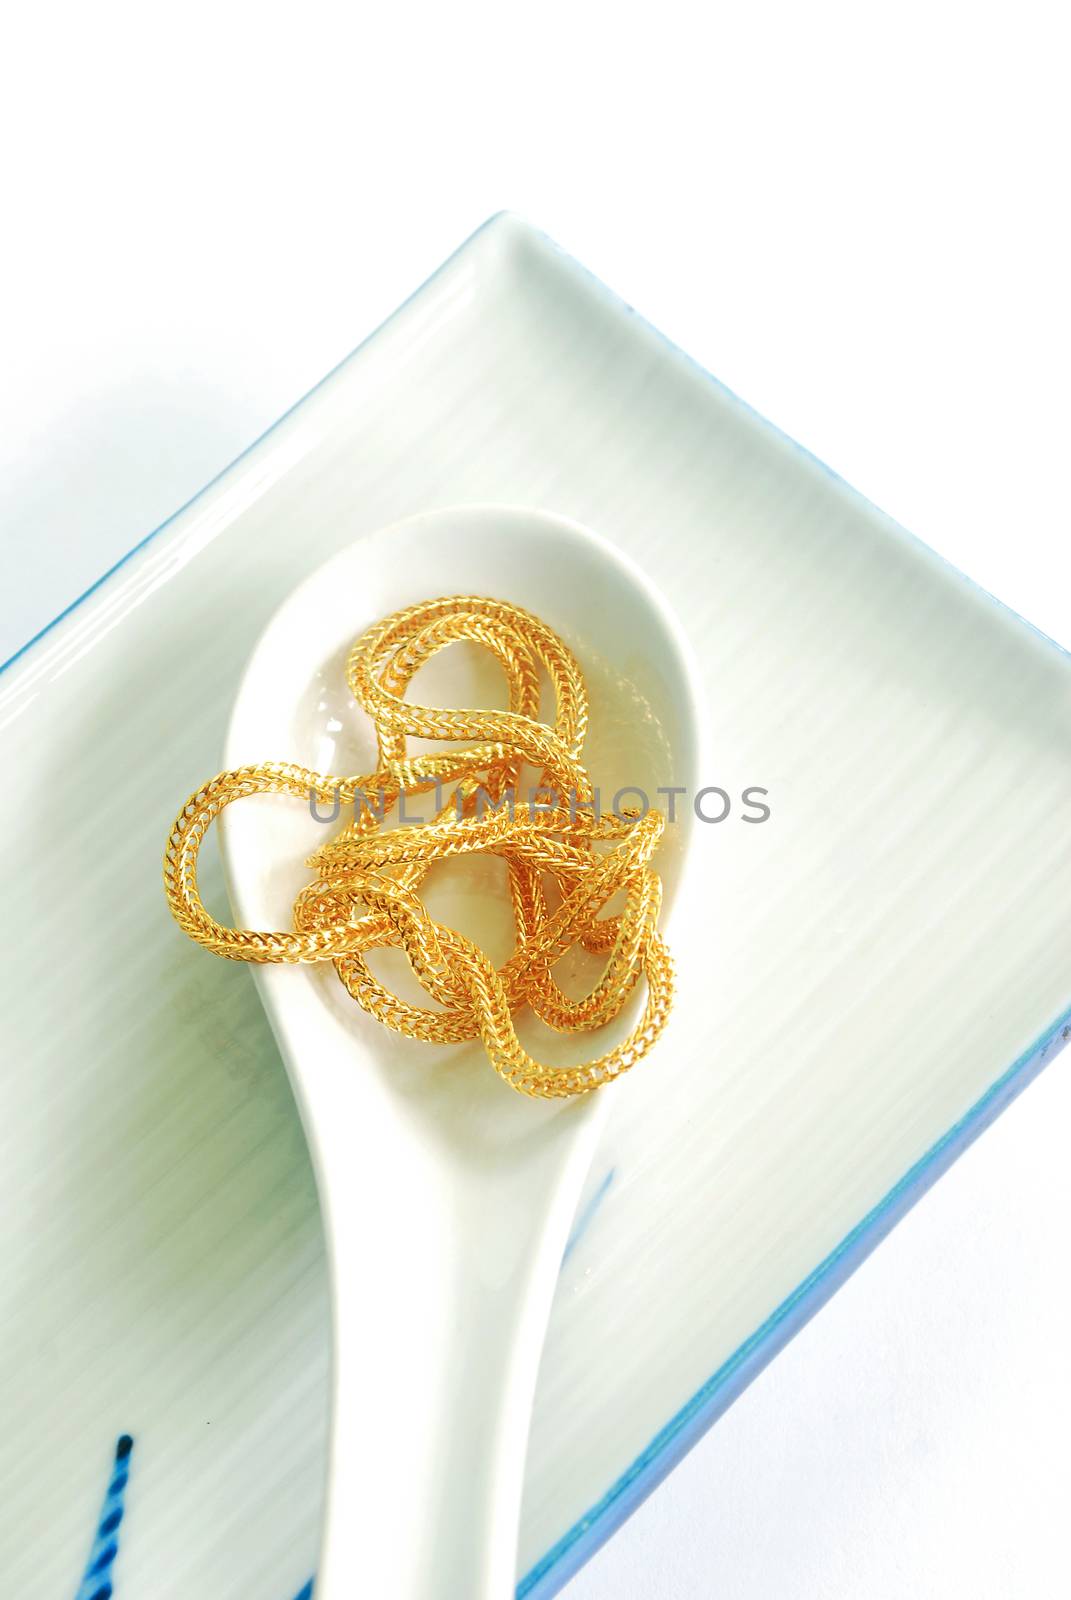 The gold neck weighs about 0.5 grams on a spoon on white background.